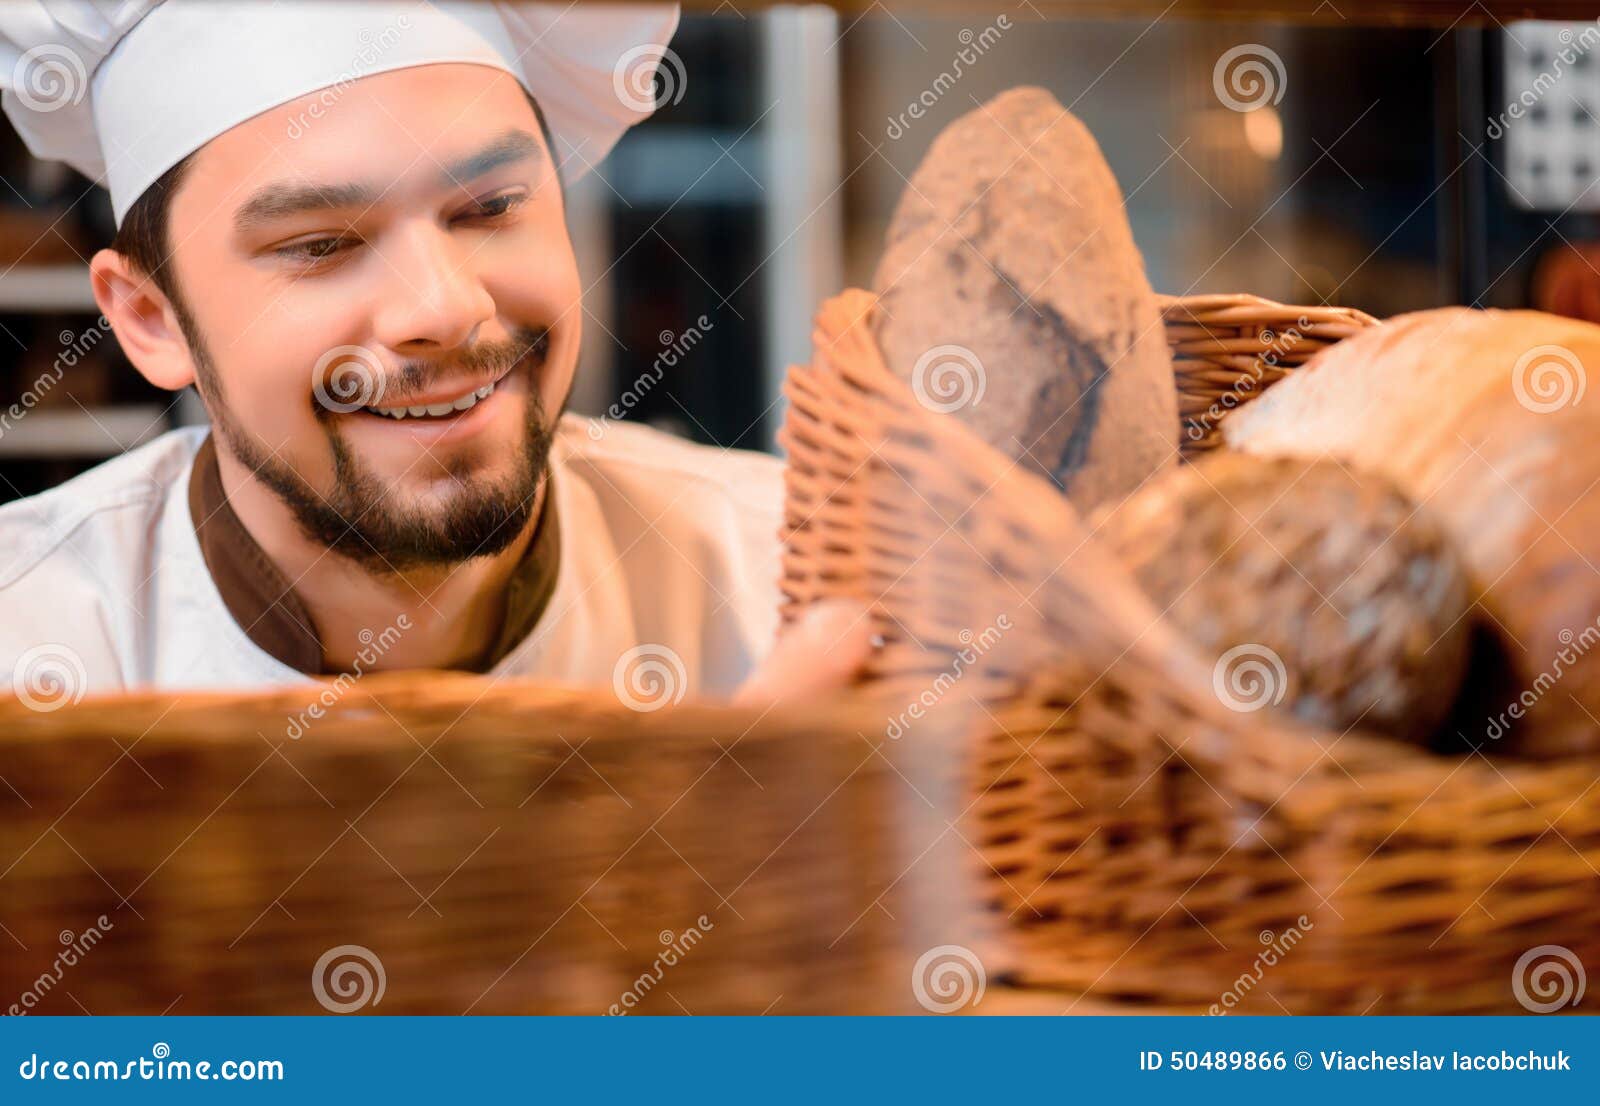 Handsome cook in the kitchen - handsome-cook-kitchen-proud-his-baked-goods-cropped-image-young-man-uniform-looking-basket-baked-goods-50489866